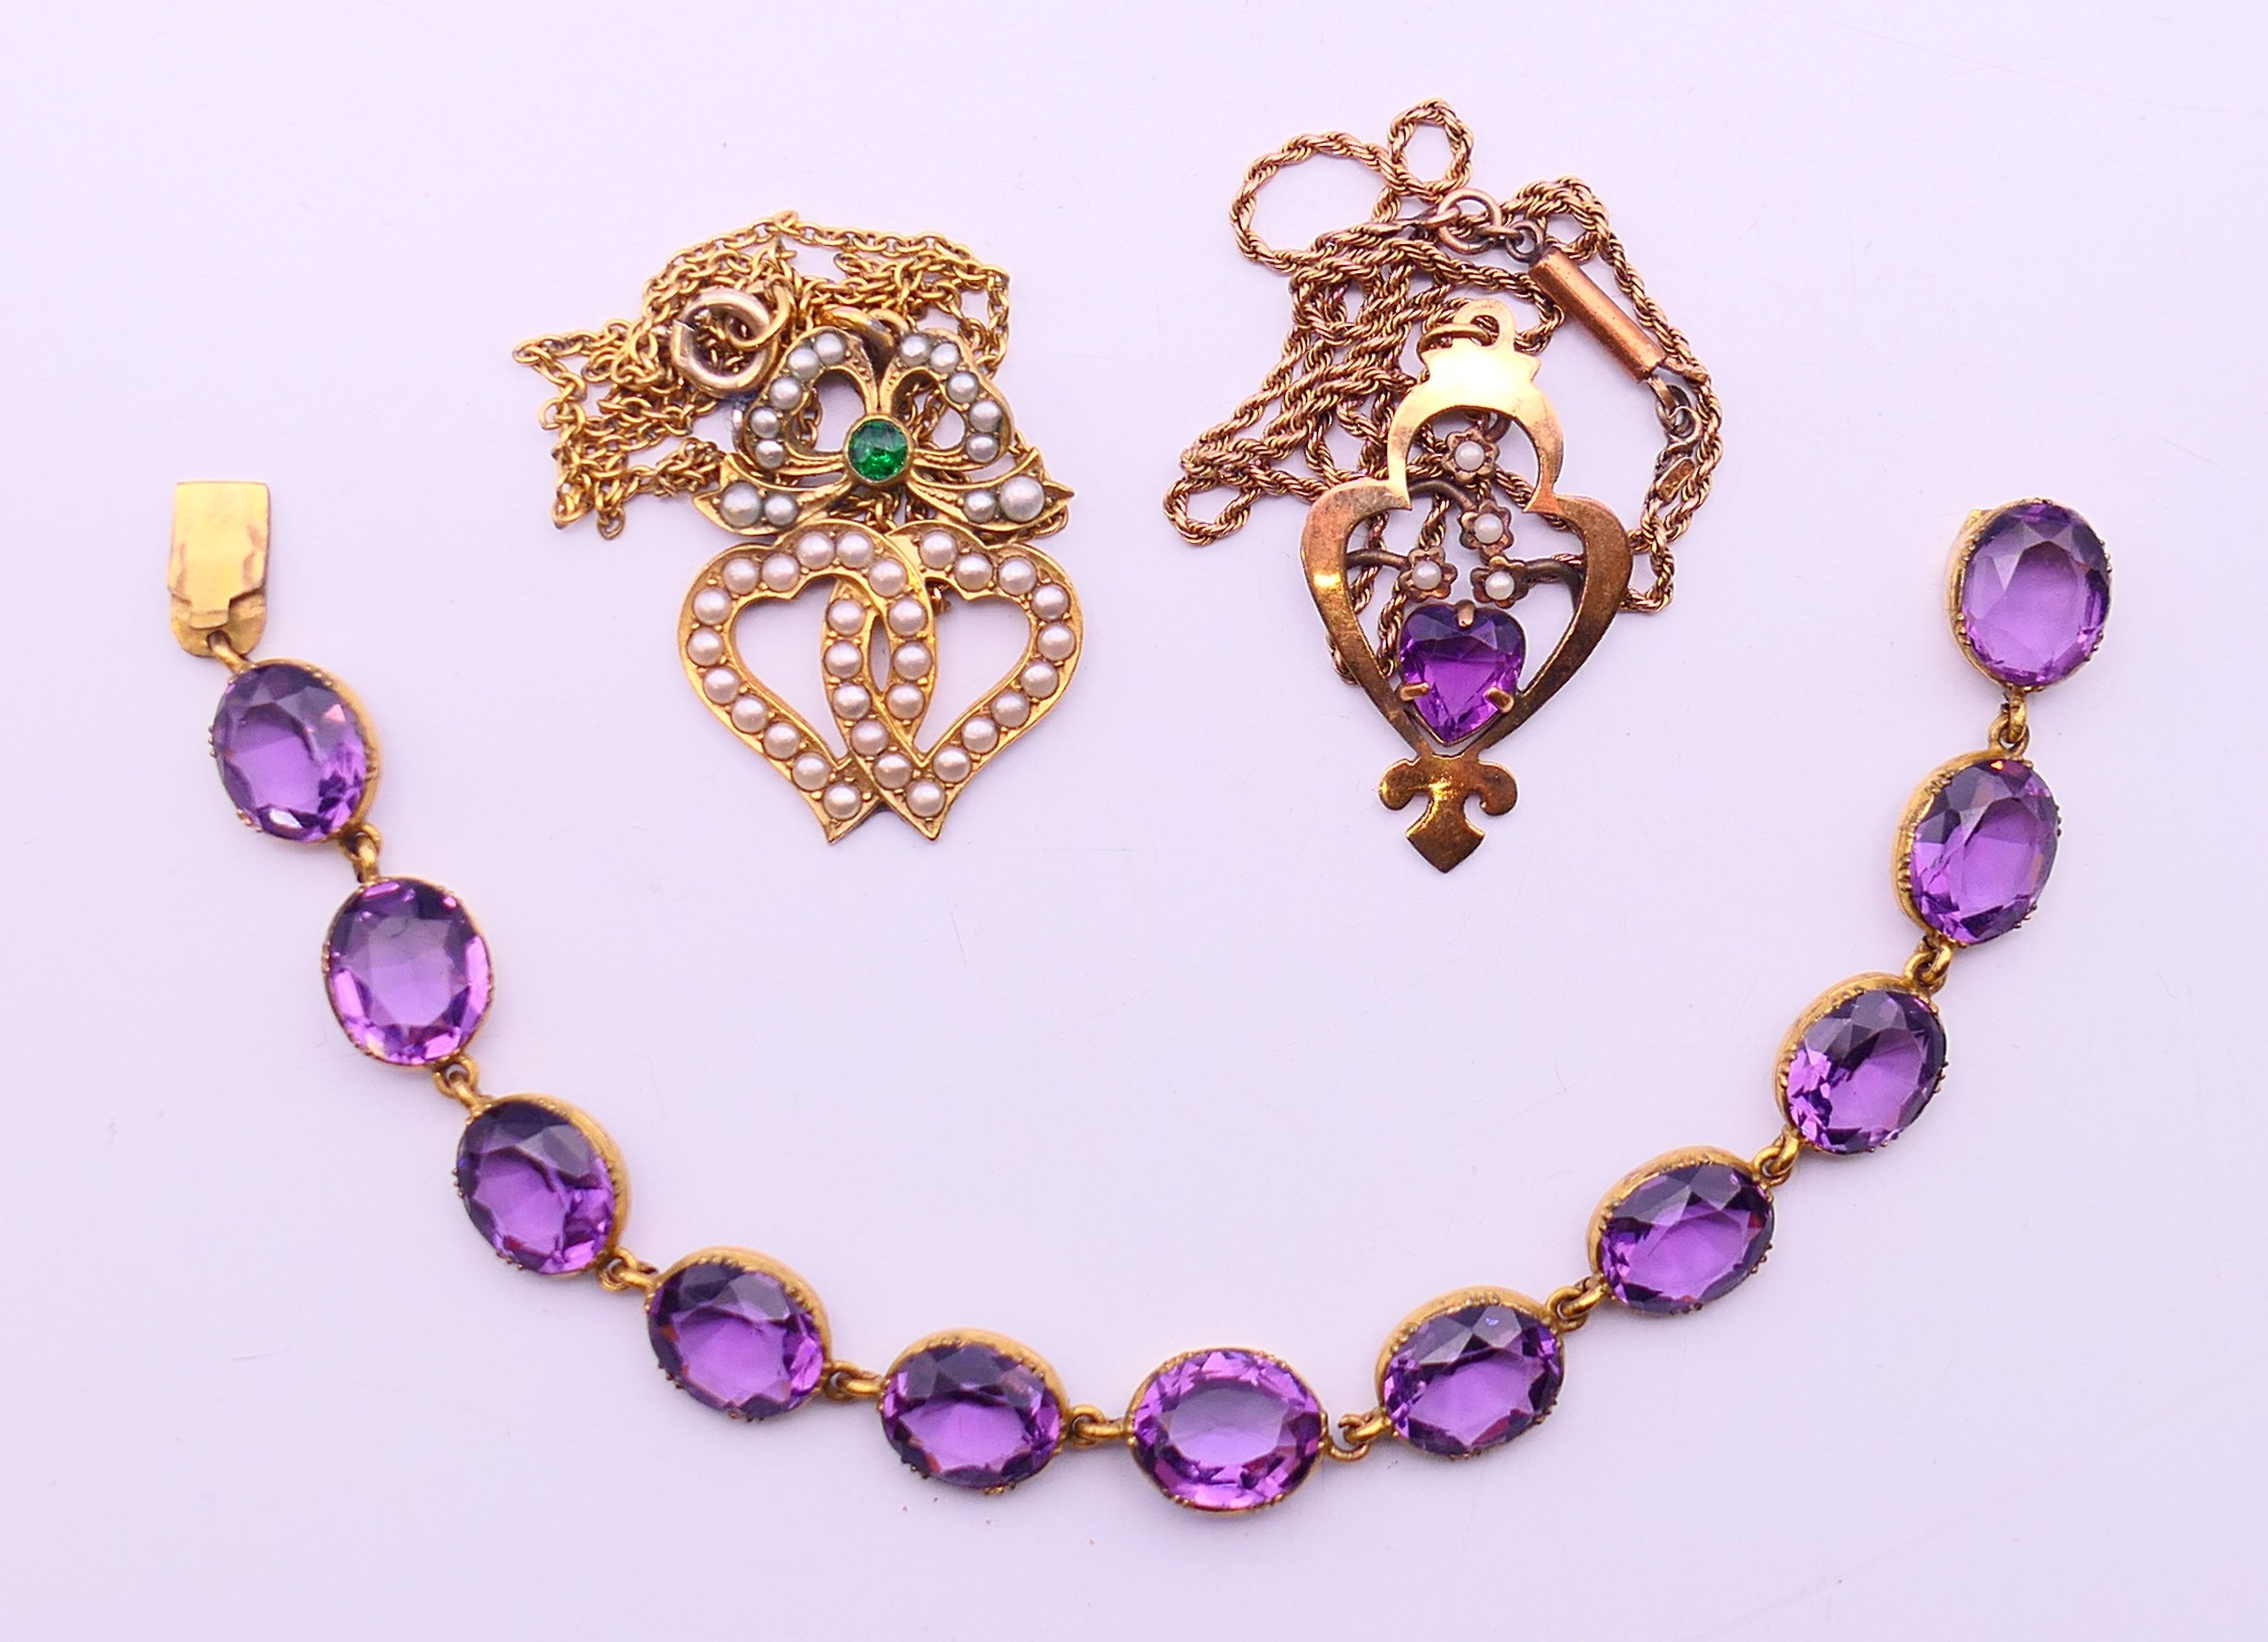 Two Edwardian pendant necklaces, one on a 9 ct gold chain, and a gilt metal and amethyst bracelet.